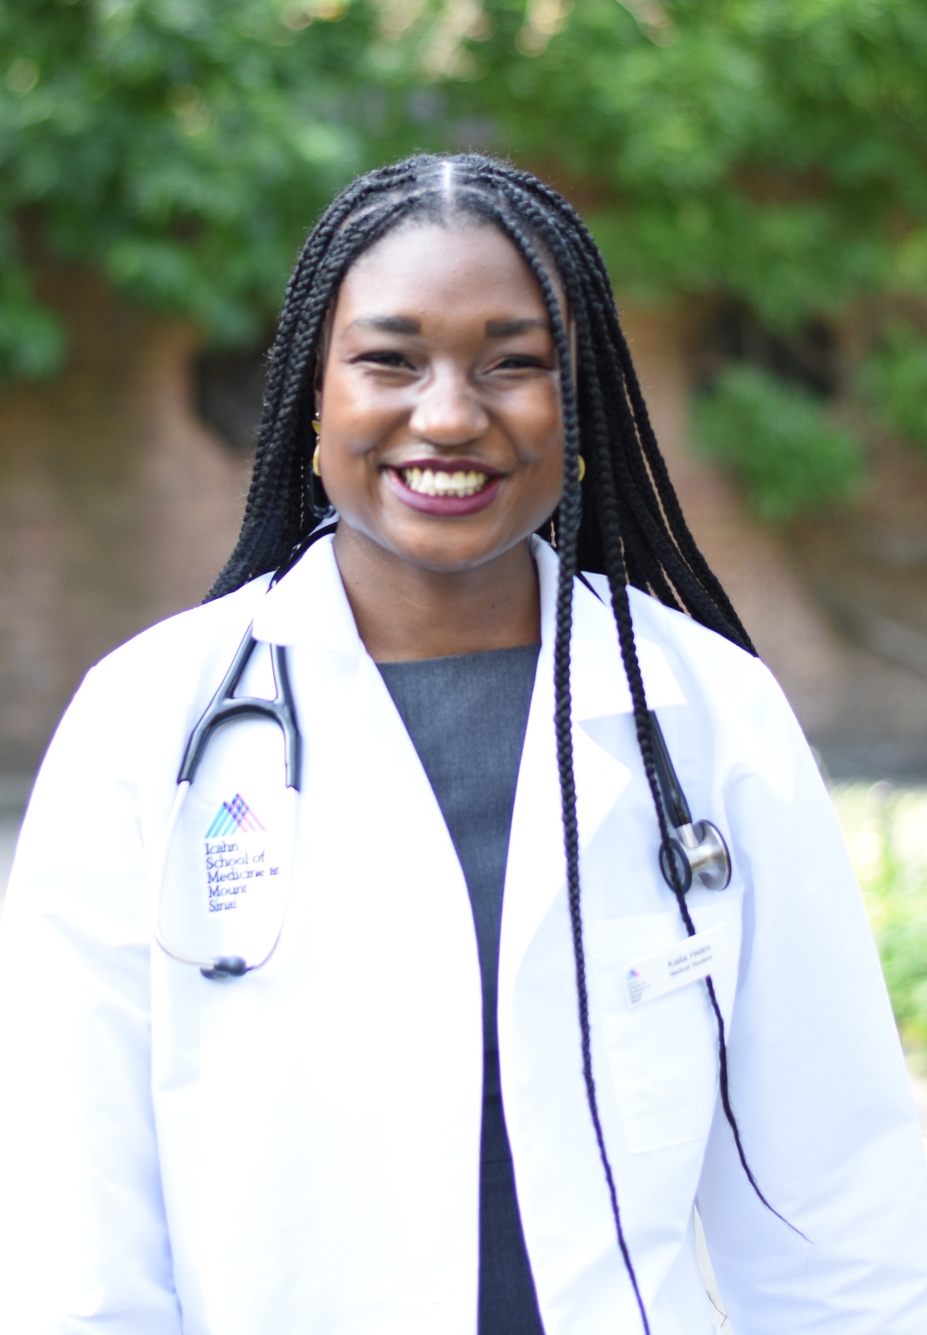 A photo of Kaila Helm wearing a white medical coat and standing in a green garden.